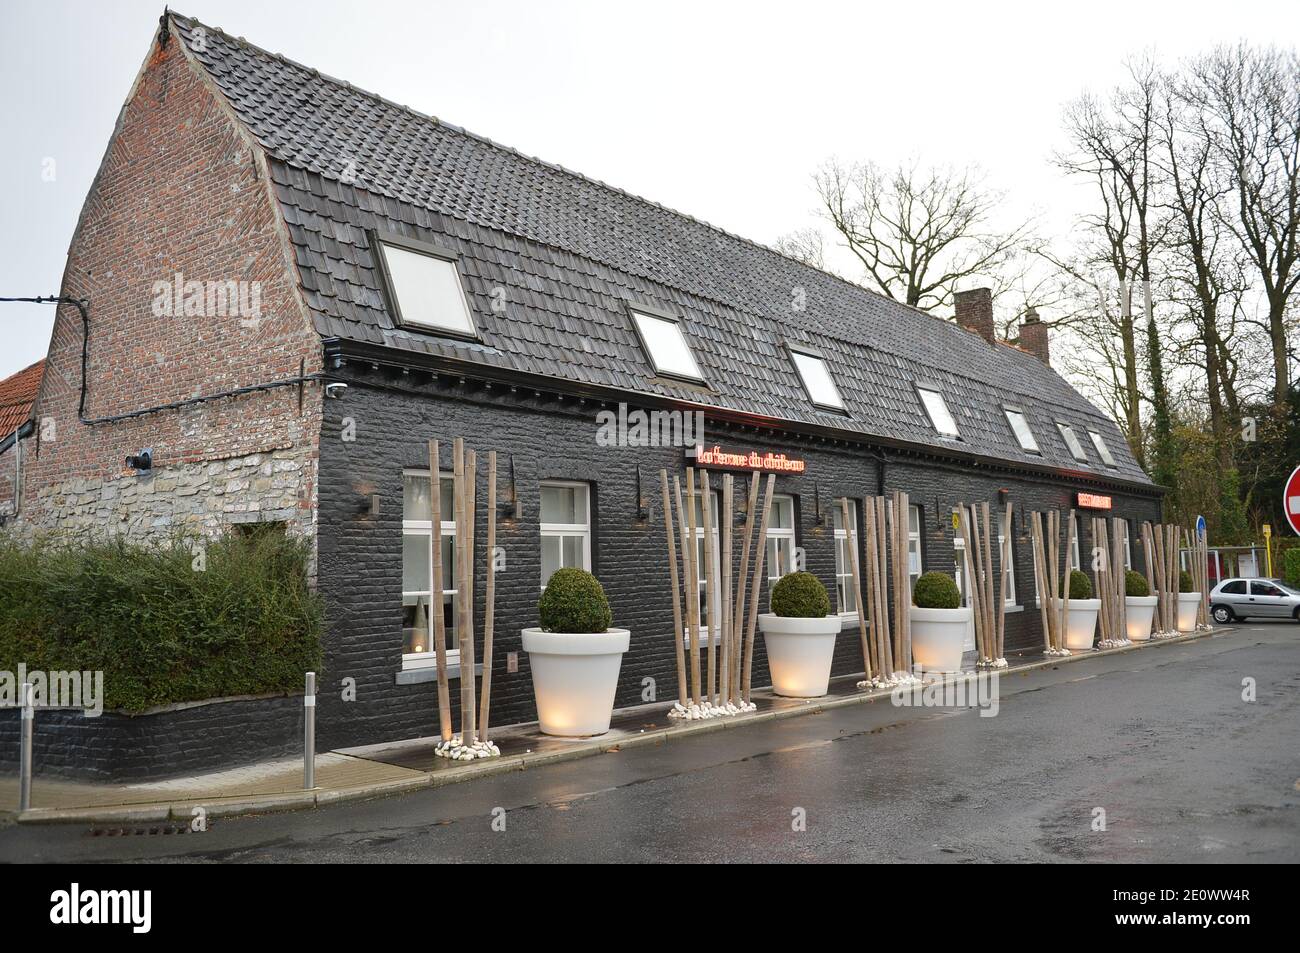 Belgium village close to the French border where French actor Gerard  Depardieu, has now a residential address according to the mayor of  Estaimpuis in Nechin, Belgium on December 10, 2012. Belgian residents